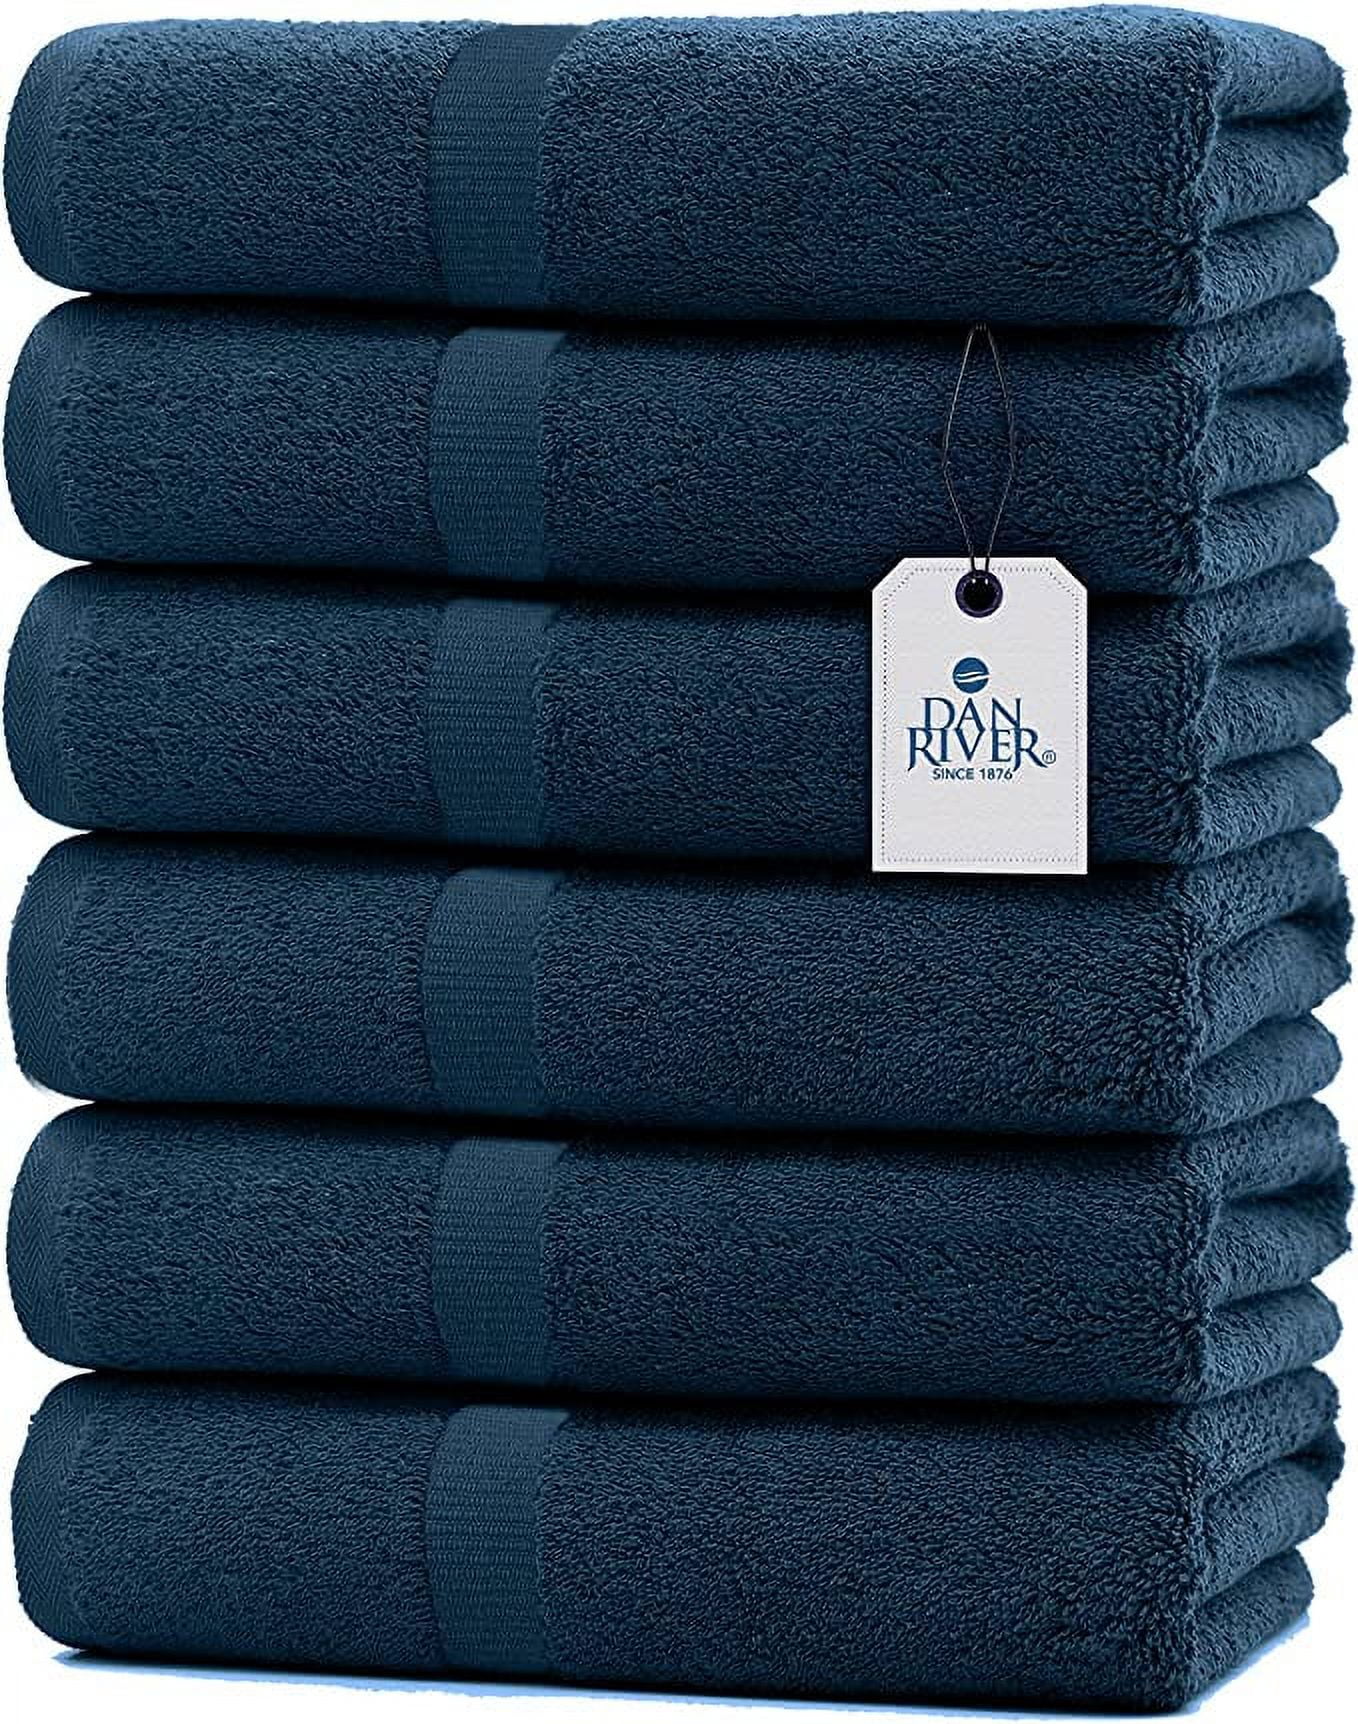 Utopia Towels - Bath Towels Set - Premium 100% Ring Spun Cotton - Quick Dry, Highly Absorbent, Soft Feel Towels, Perfect for Daily Use (Pack of 4) (